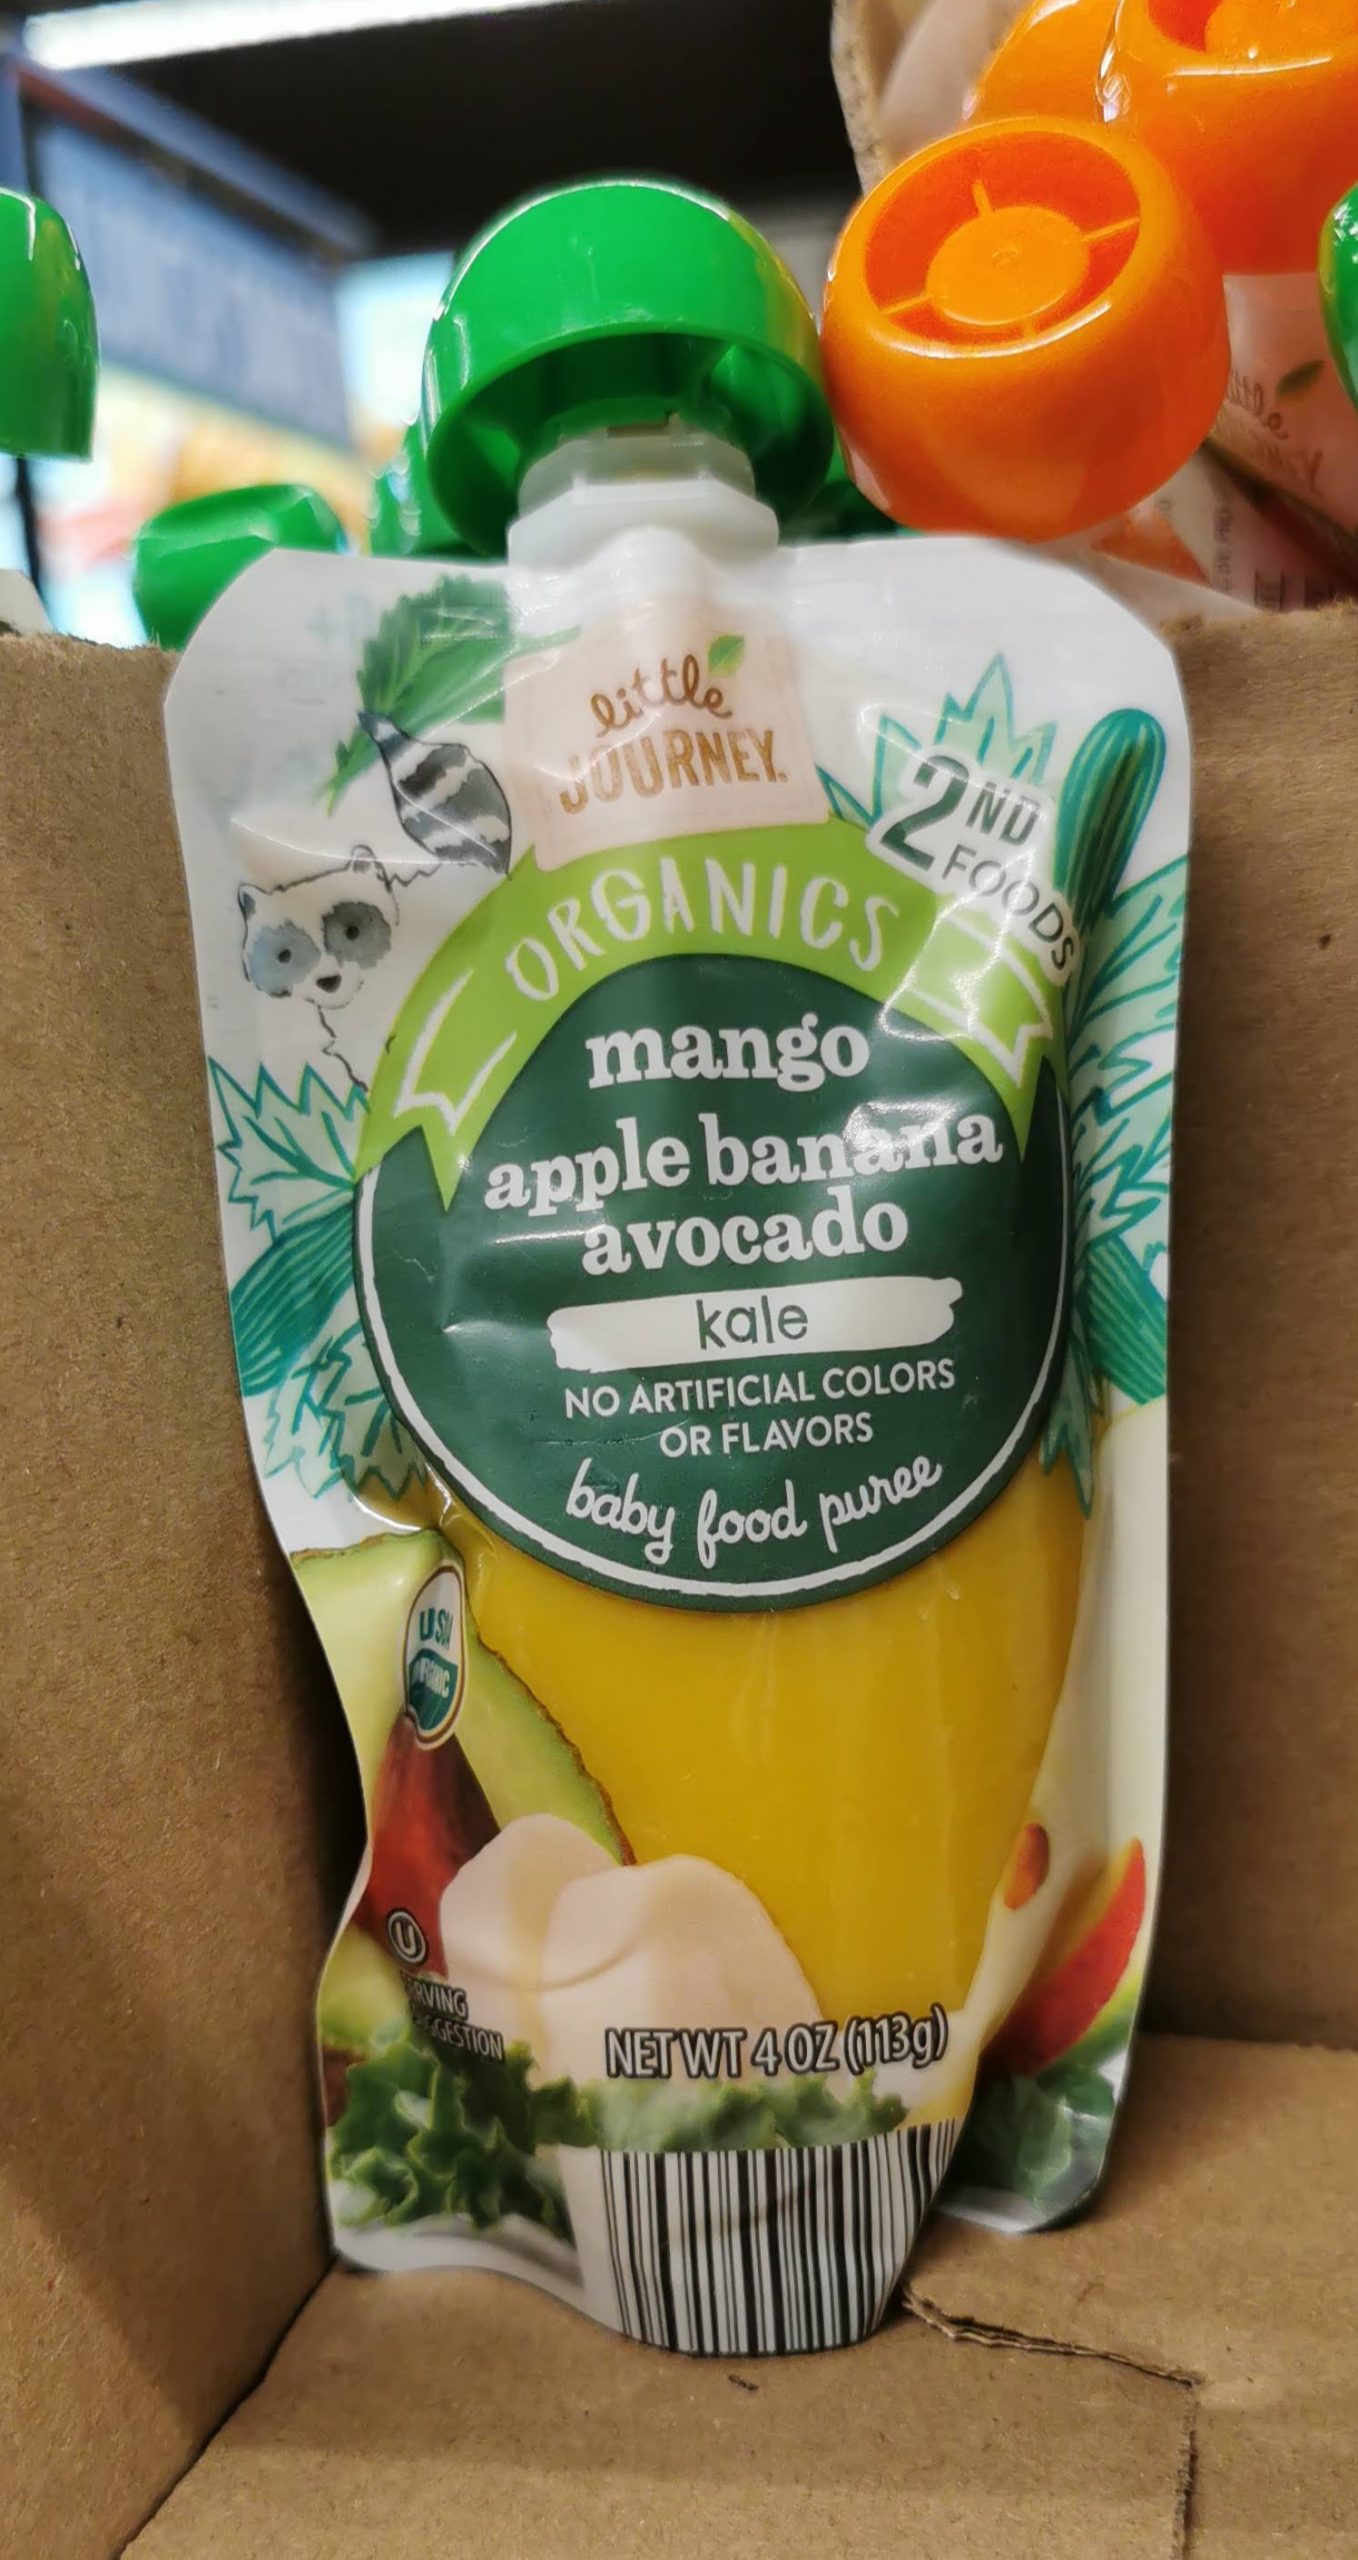 Read more about the article Little Journey Organics Mango Apple Banana Avocado and Kale Baby Food Puree (Aldi)